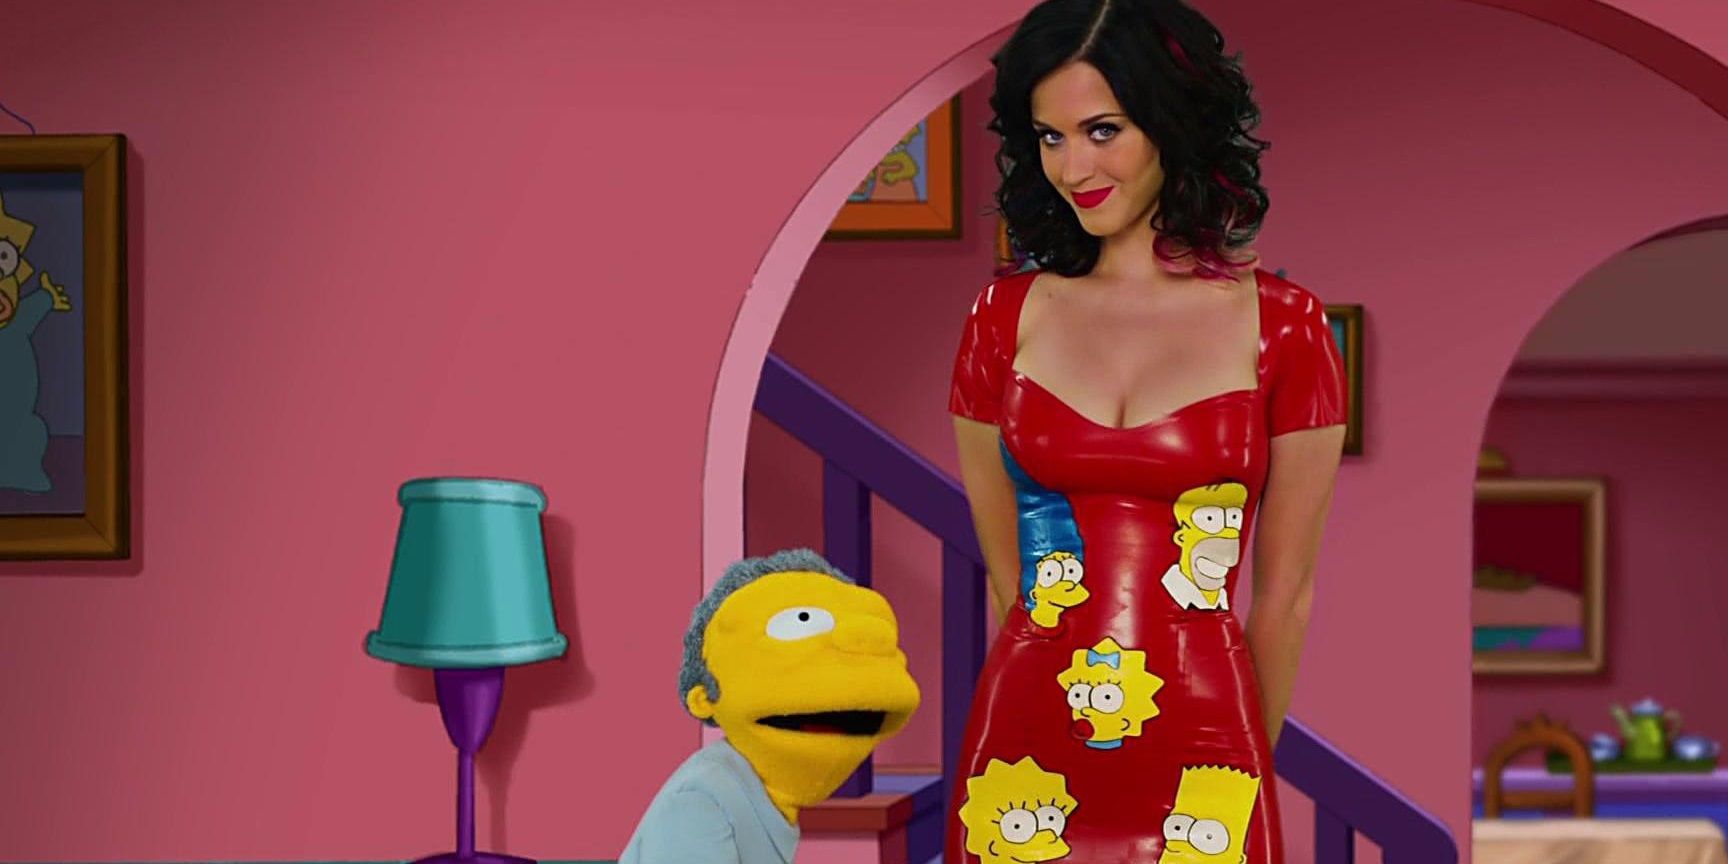 Katy Perry in The Simpsons